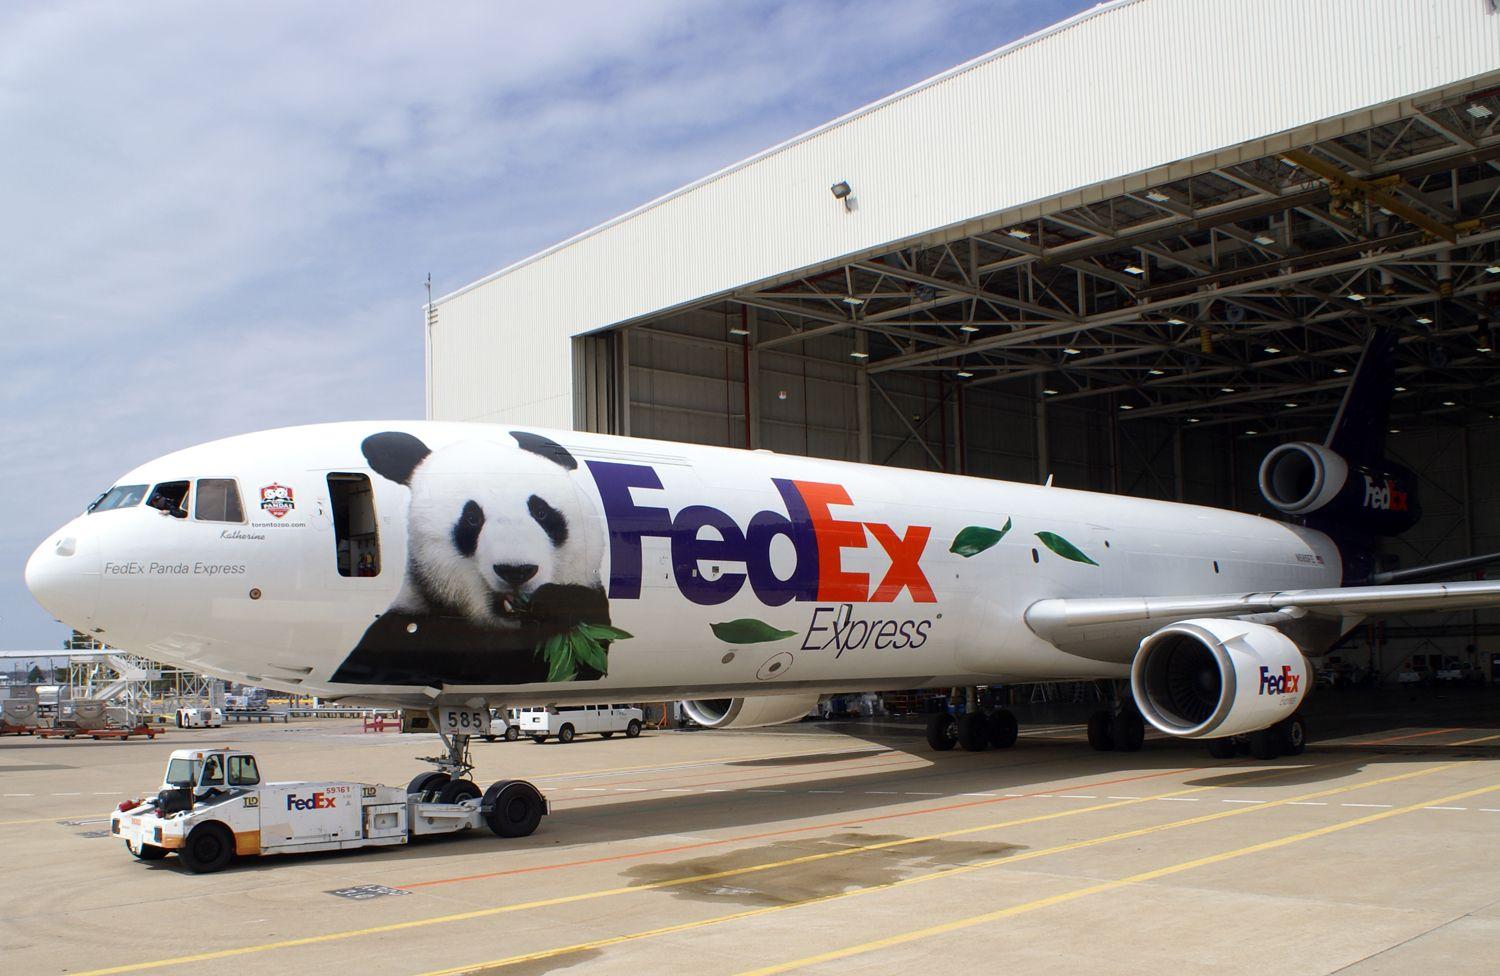 FedEx Airlines Logo - The FedEx Panda Express - China to Canada